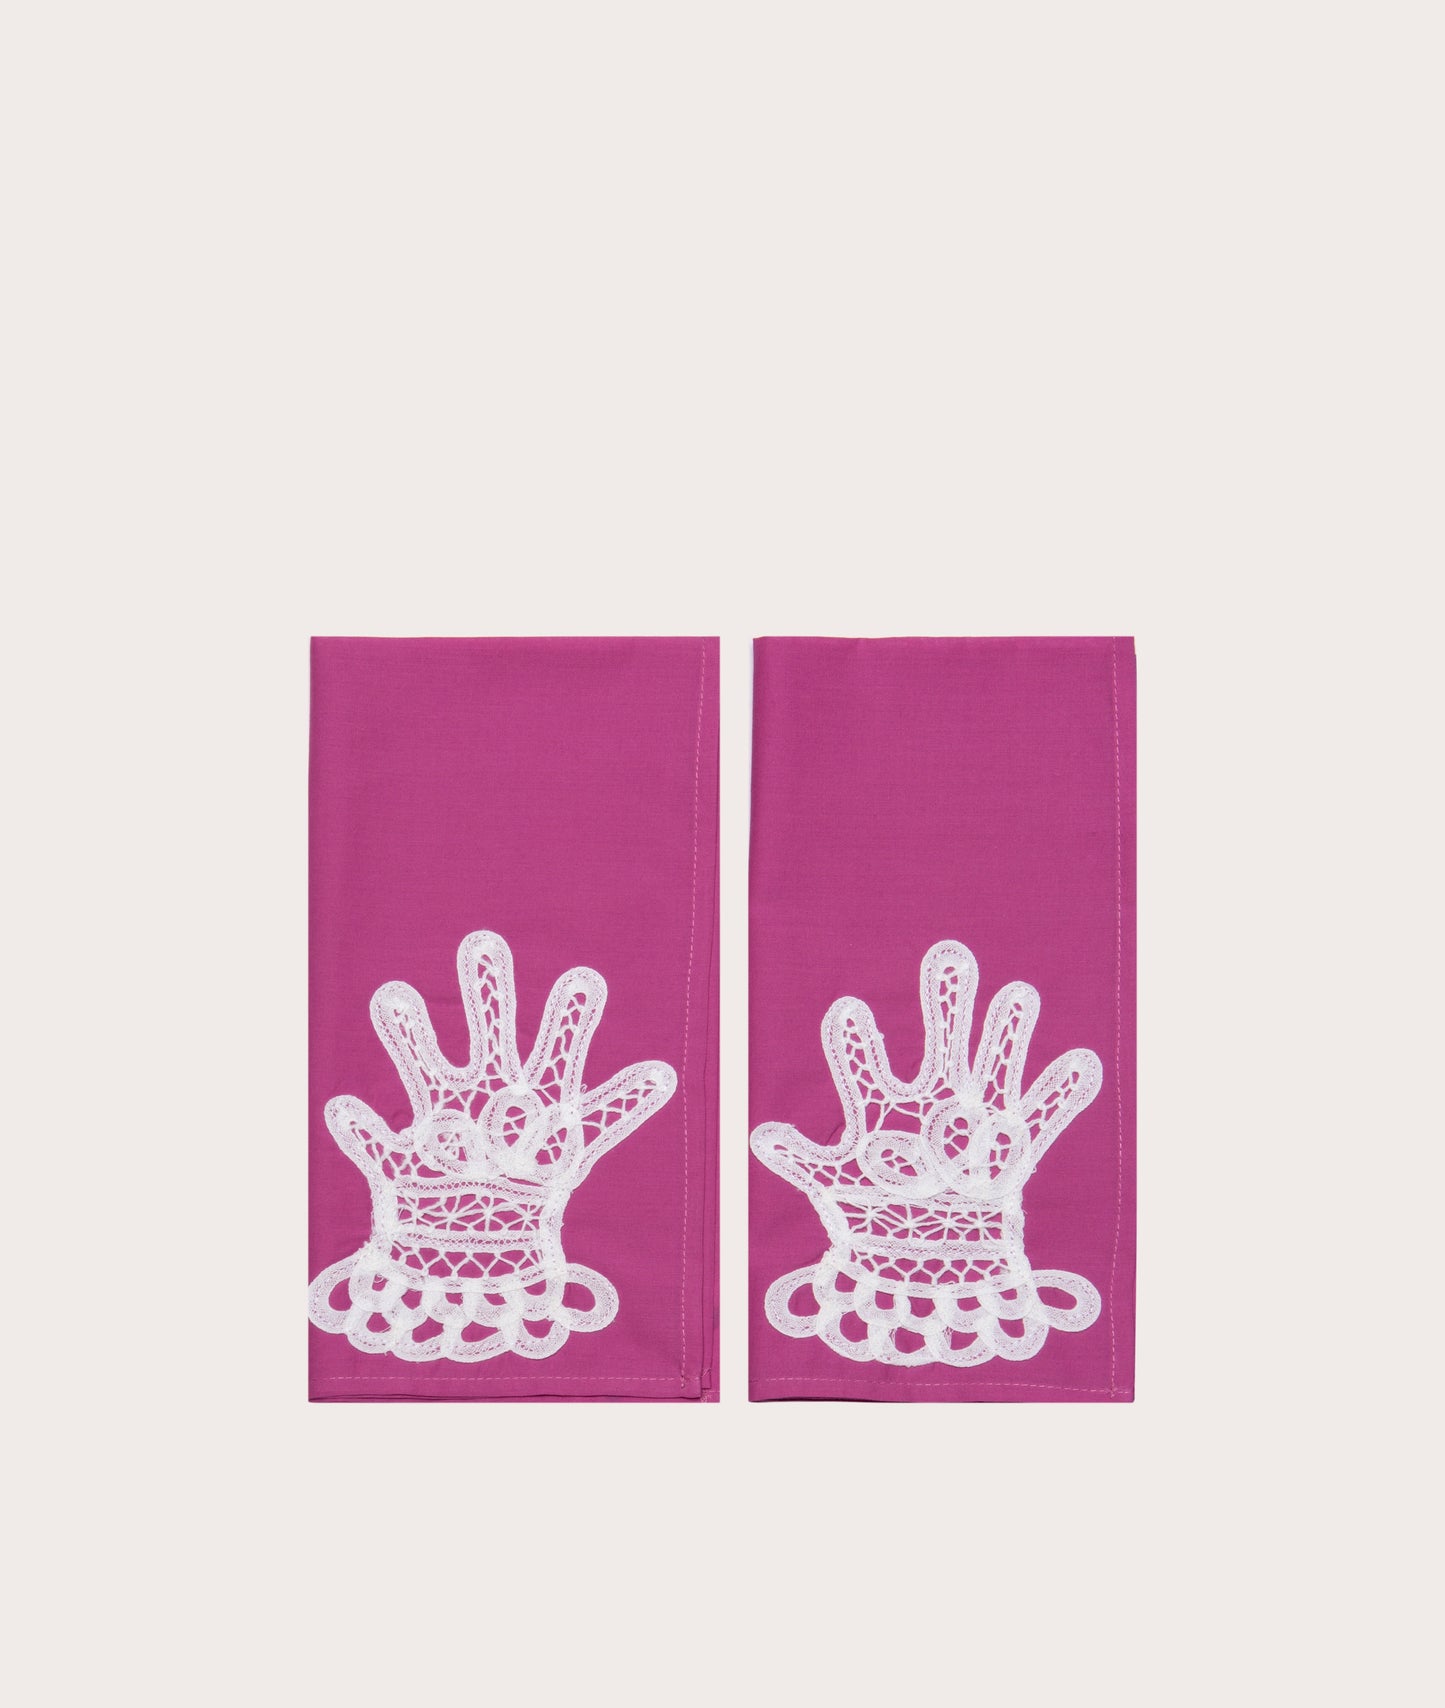 Dinner Napkin with Lace Appliqué, Hands - Pair